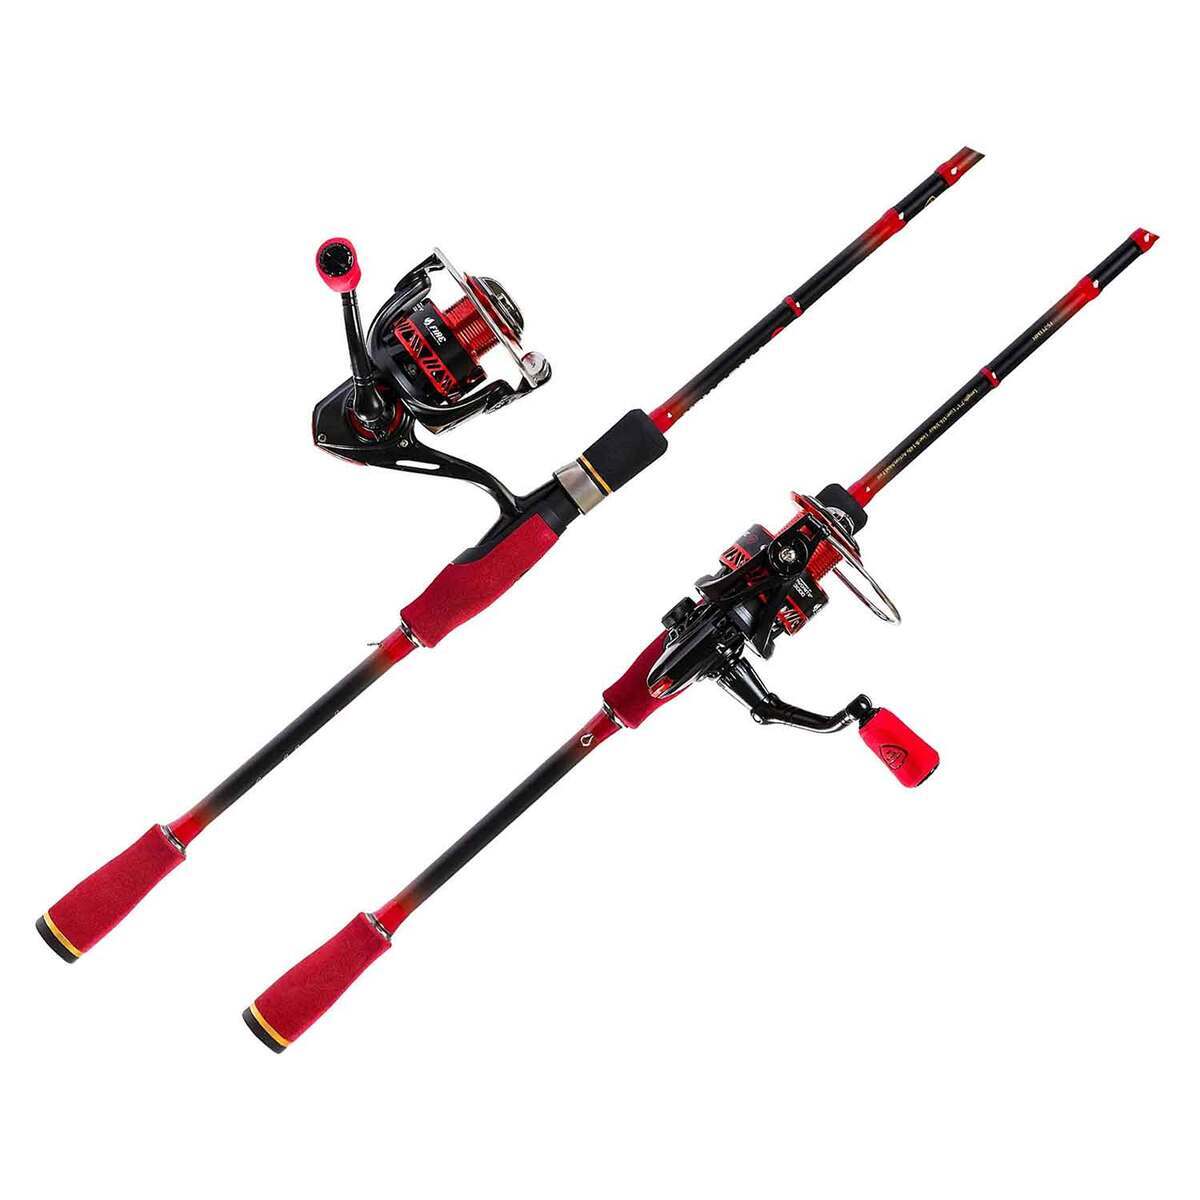 Favorite Fishing Fire Stick Spinning Combo - 7ft 1in, Medium Heavy